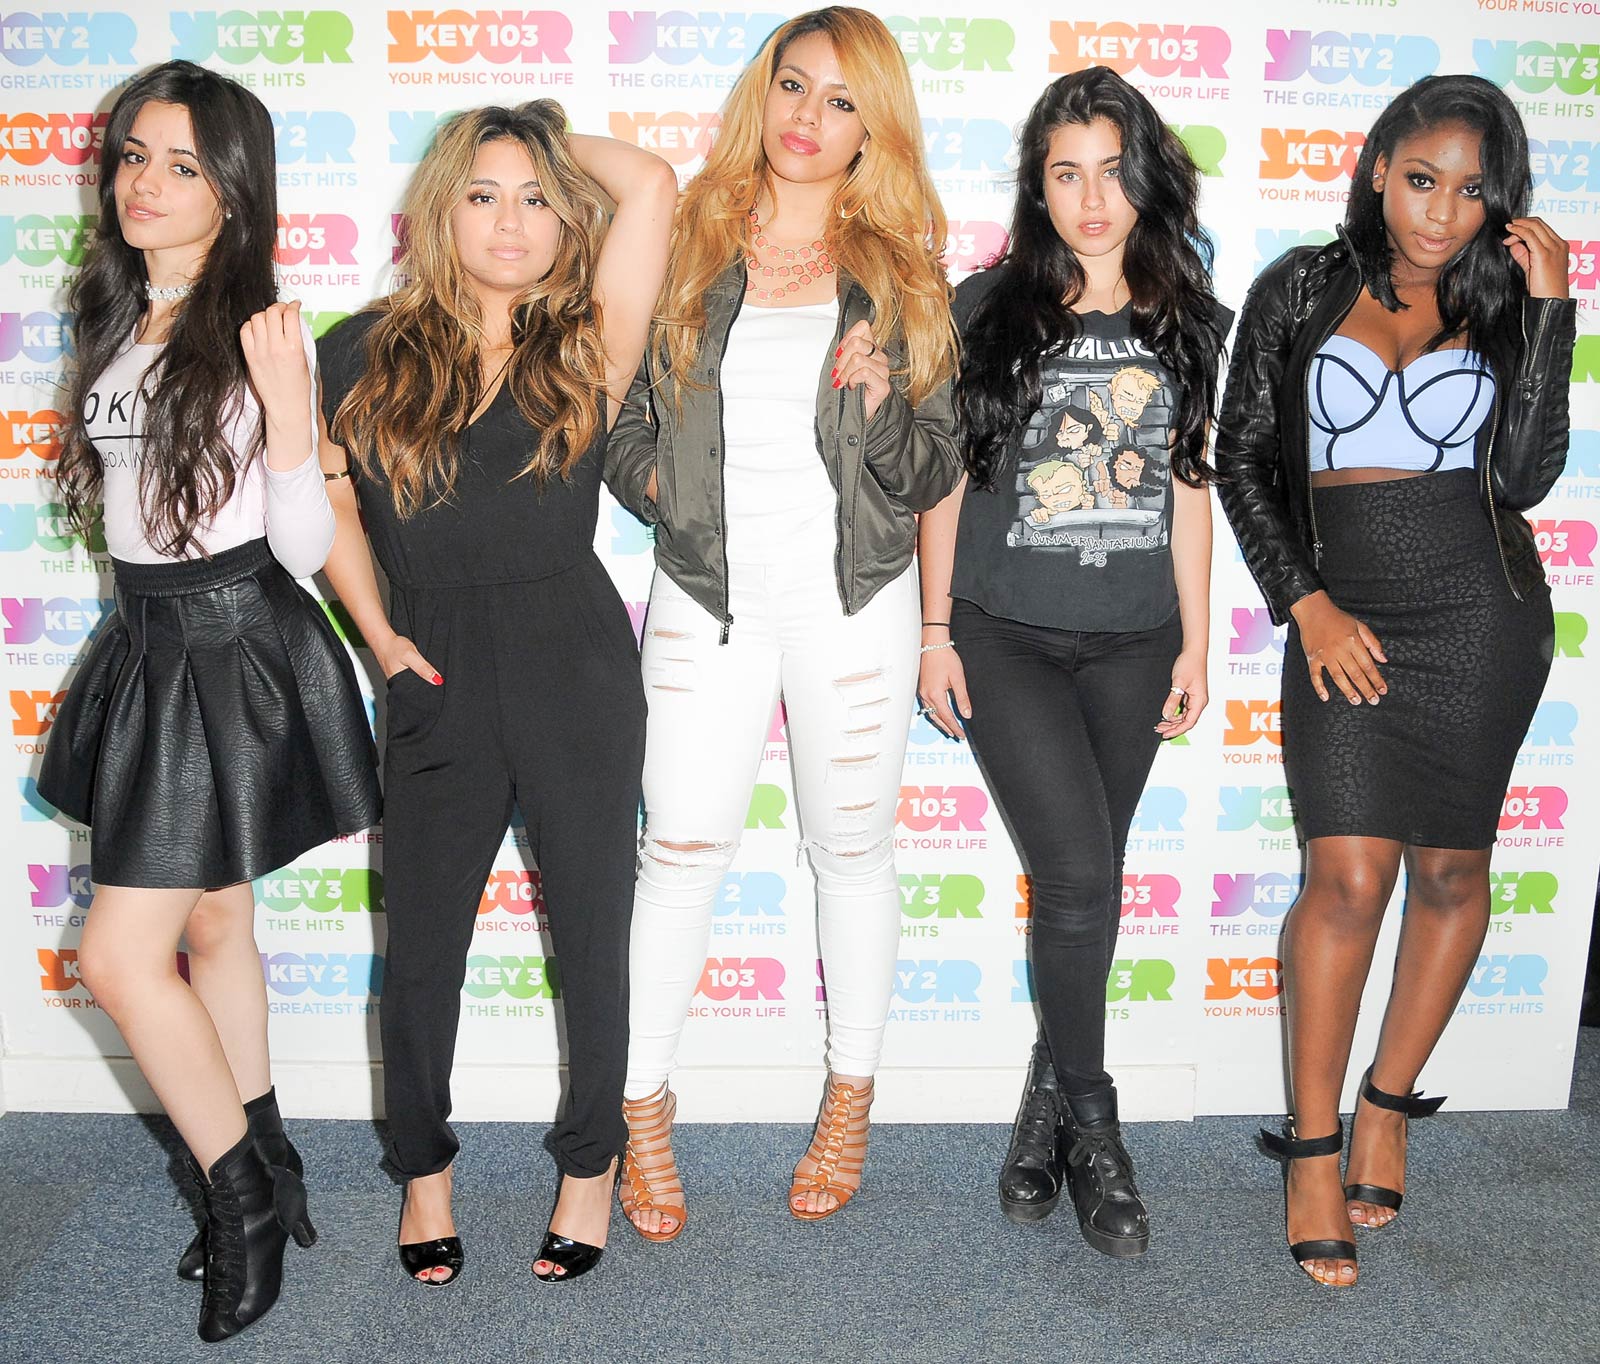 Fifth Harmony at Radio Station Key 103 in Manchester